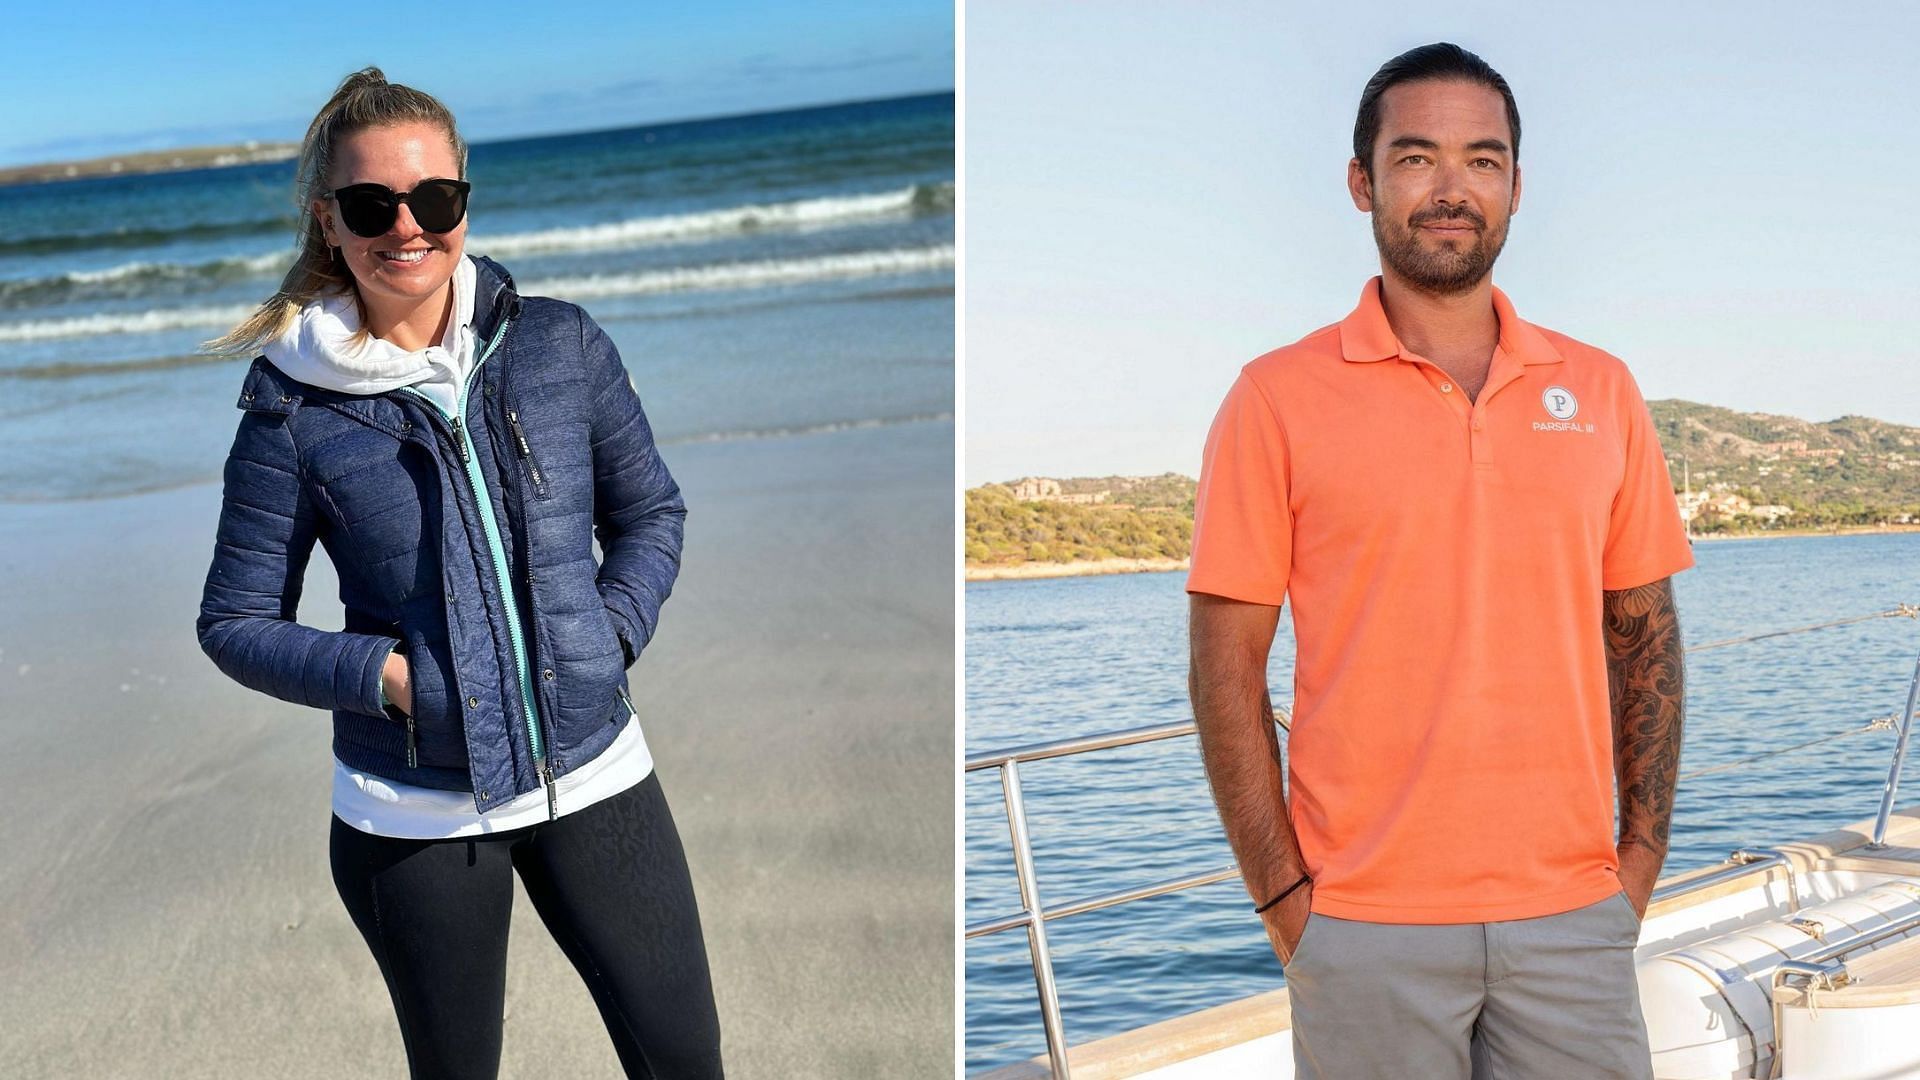 Daisy talks about her dynamic with Colin on Below Deck Sailing Yacht